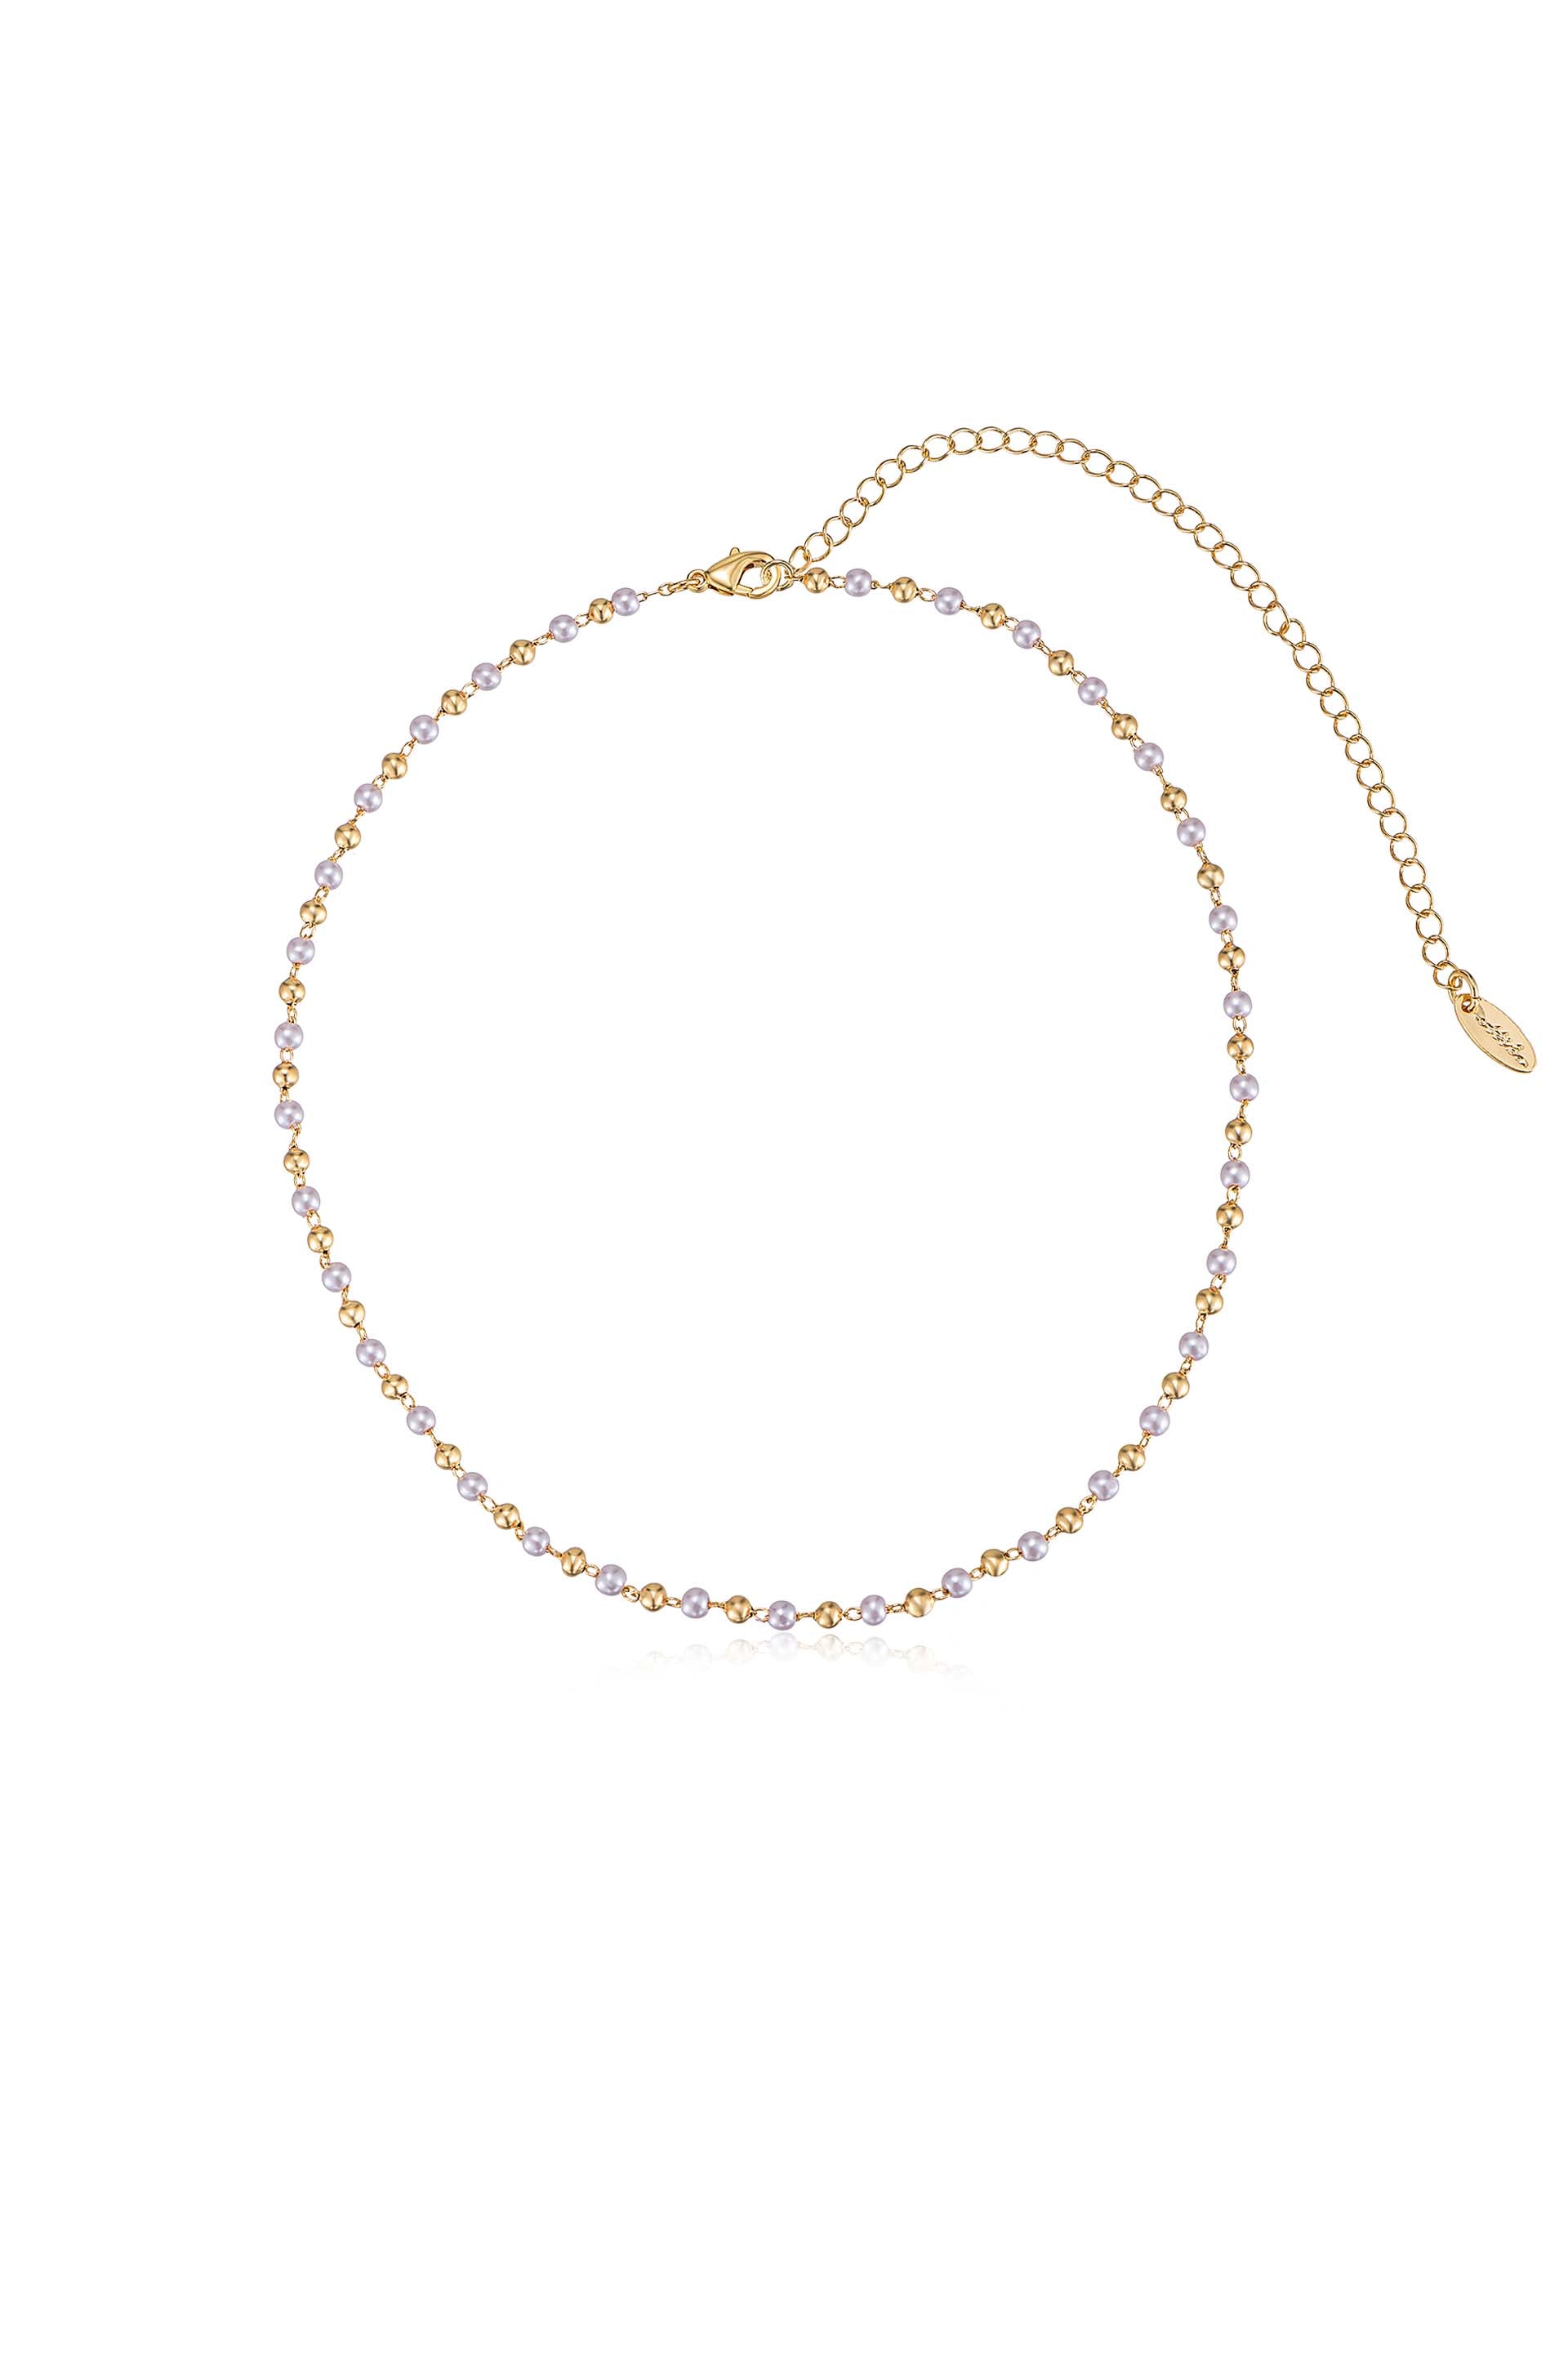 Crystal Spark and 18k Gold Plated Ball Chain Necklace Set 1